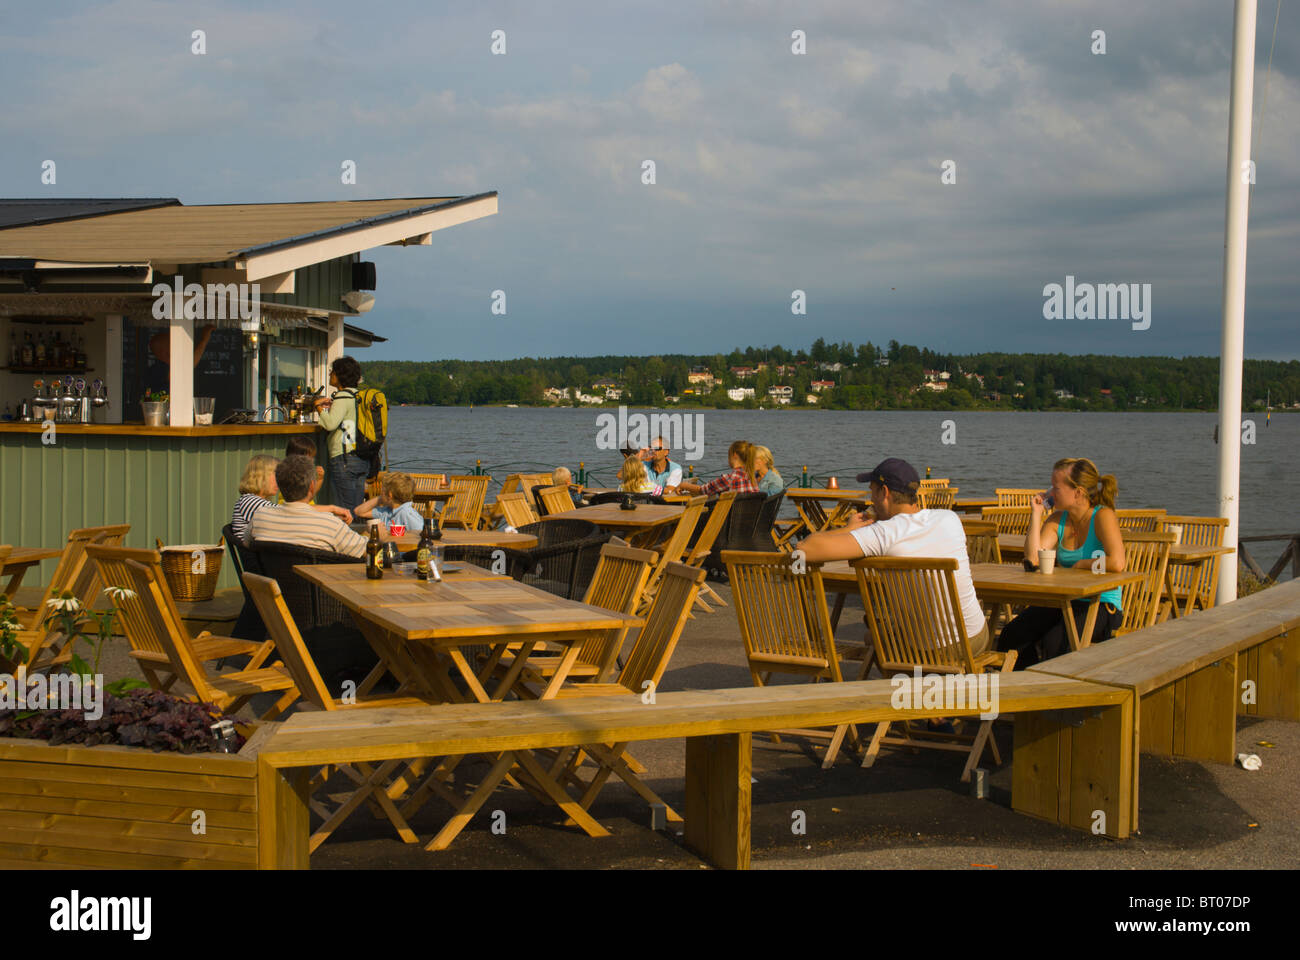 Cafe restaurant at the port of Sigtuna the oldest town in Sweden in Greater Stockholm area Stock Photo